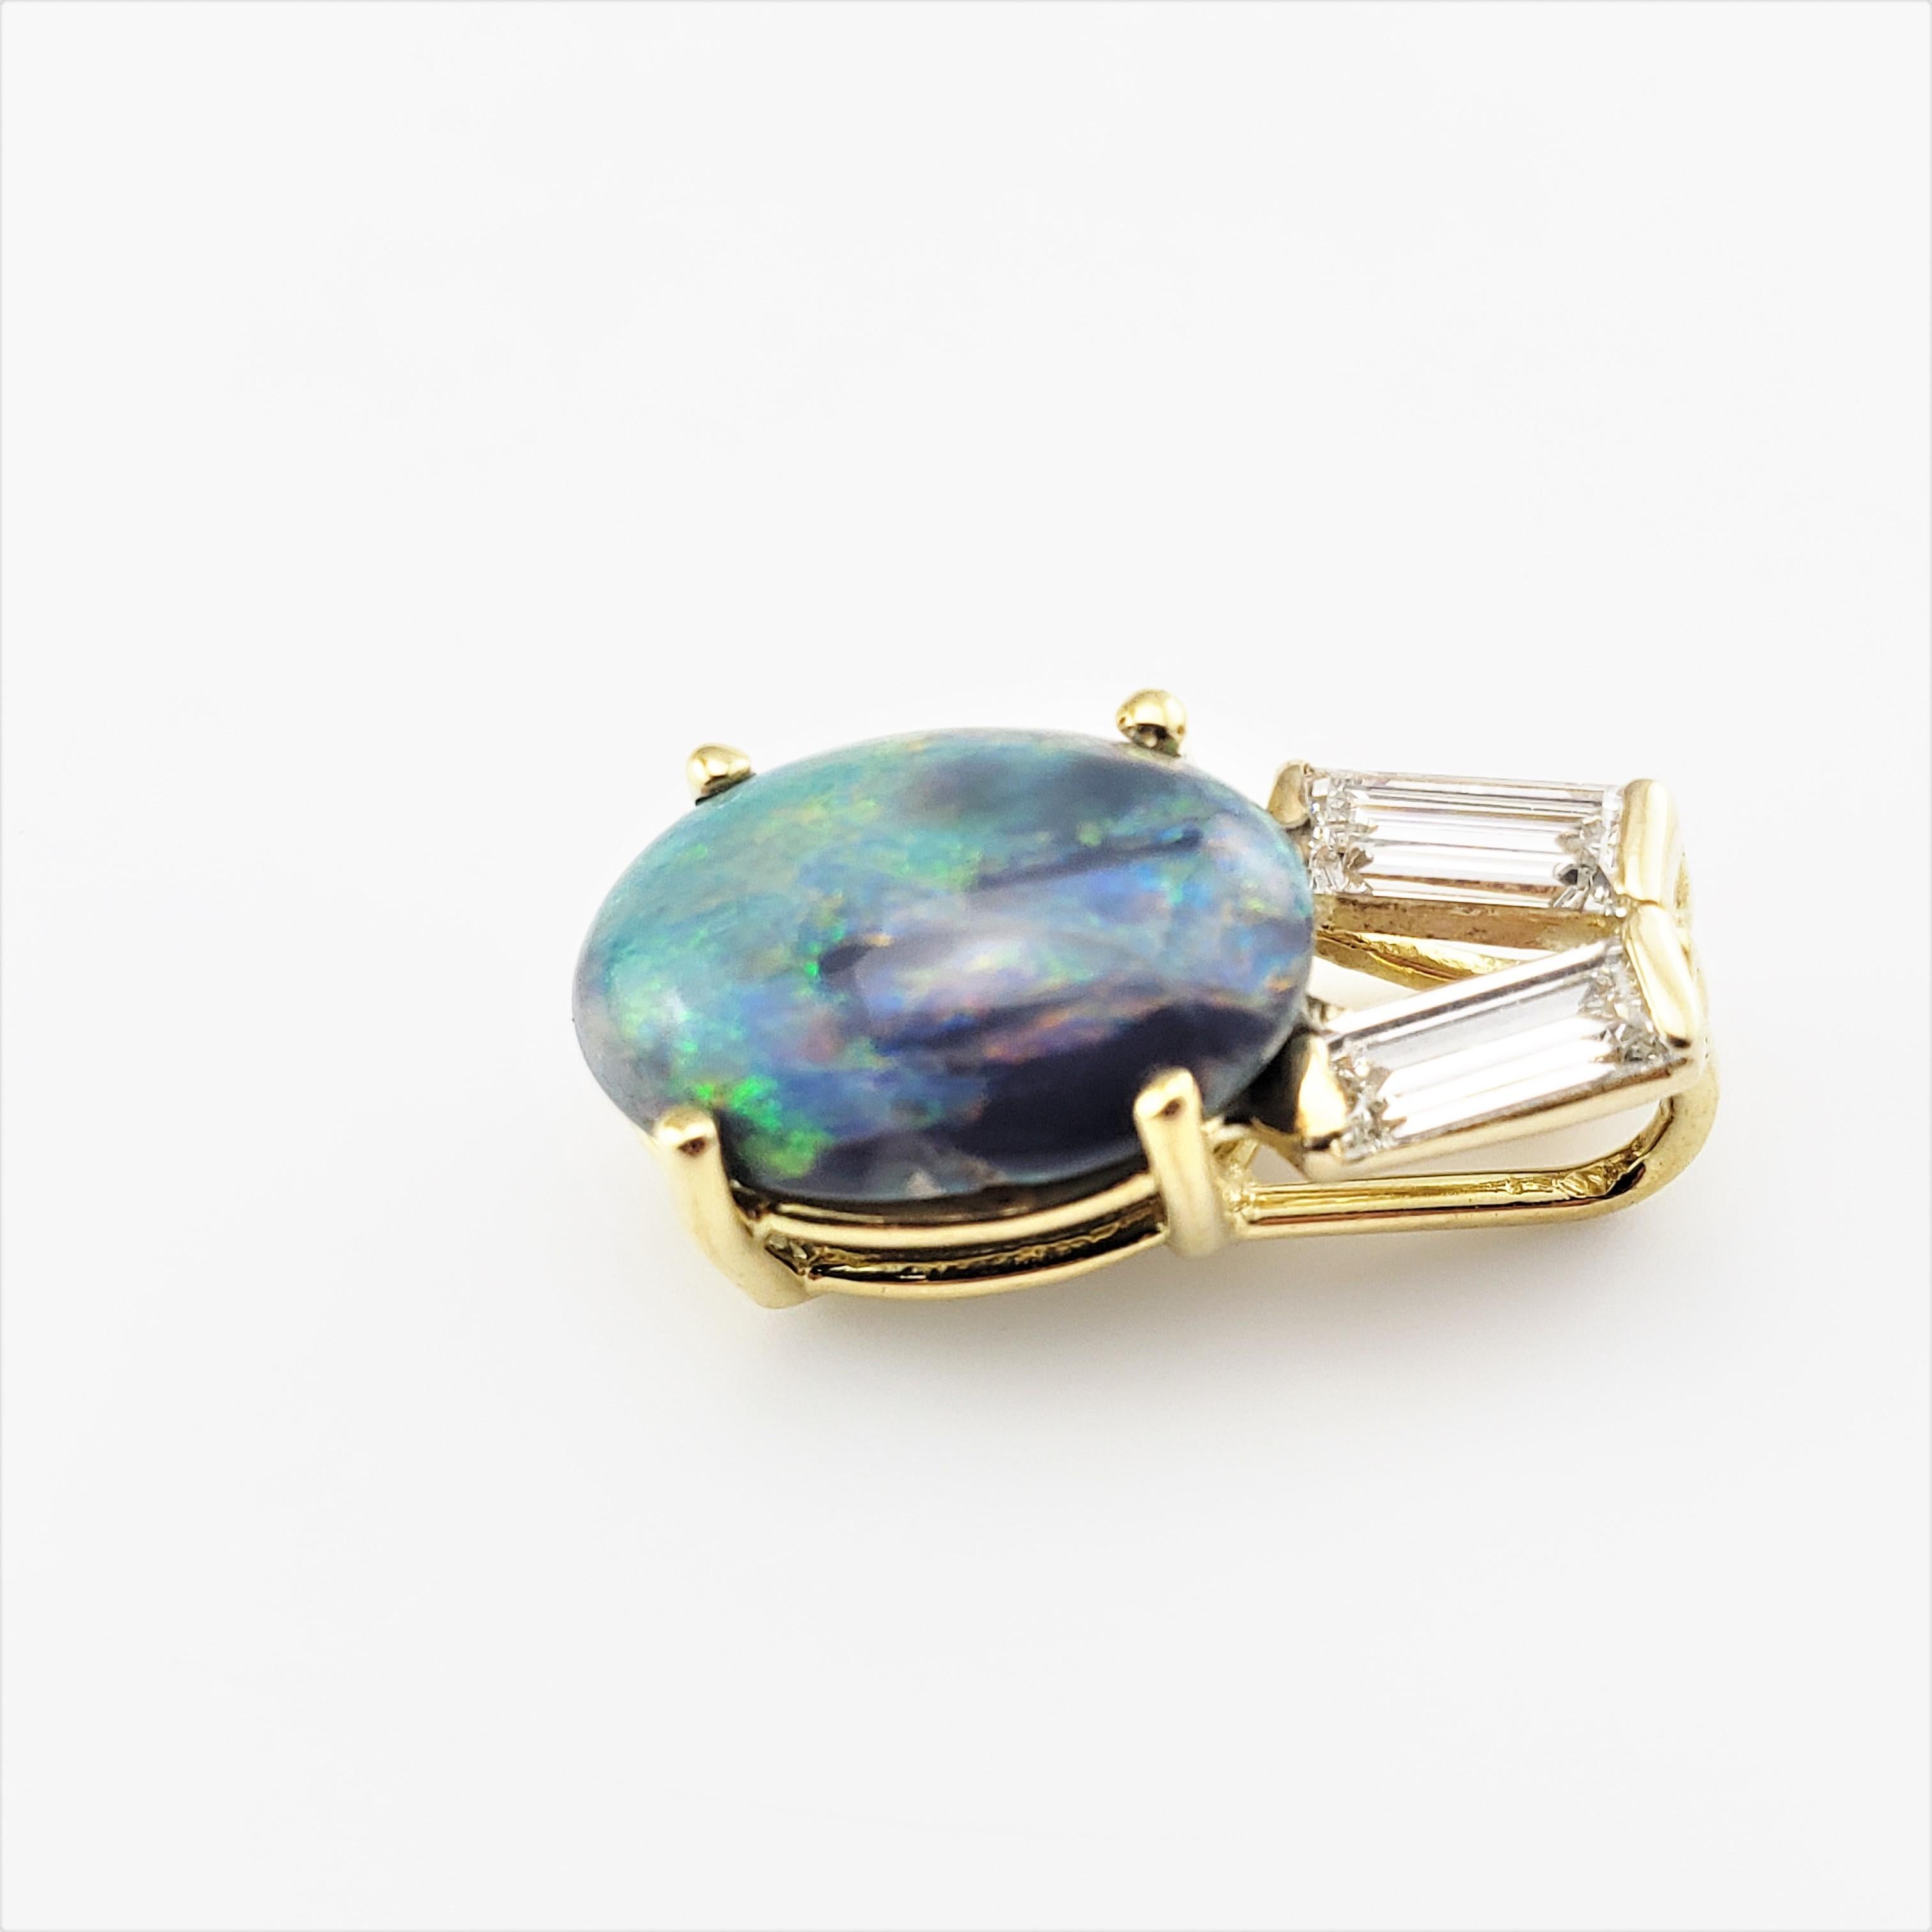 14 Karat Yellow Gold Black Opal and Diamond Pendant 

This stunning pendant features one oval black opal (12 mm x 9 mm) and two baguette diamonds set in classic 18K yellow gold.

*Chain not included.

Opal weight:  1.53 ct. ( Opal was approximately